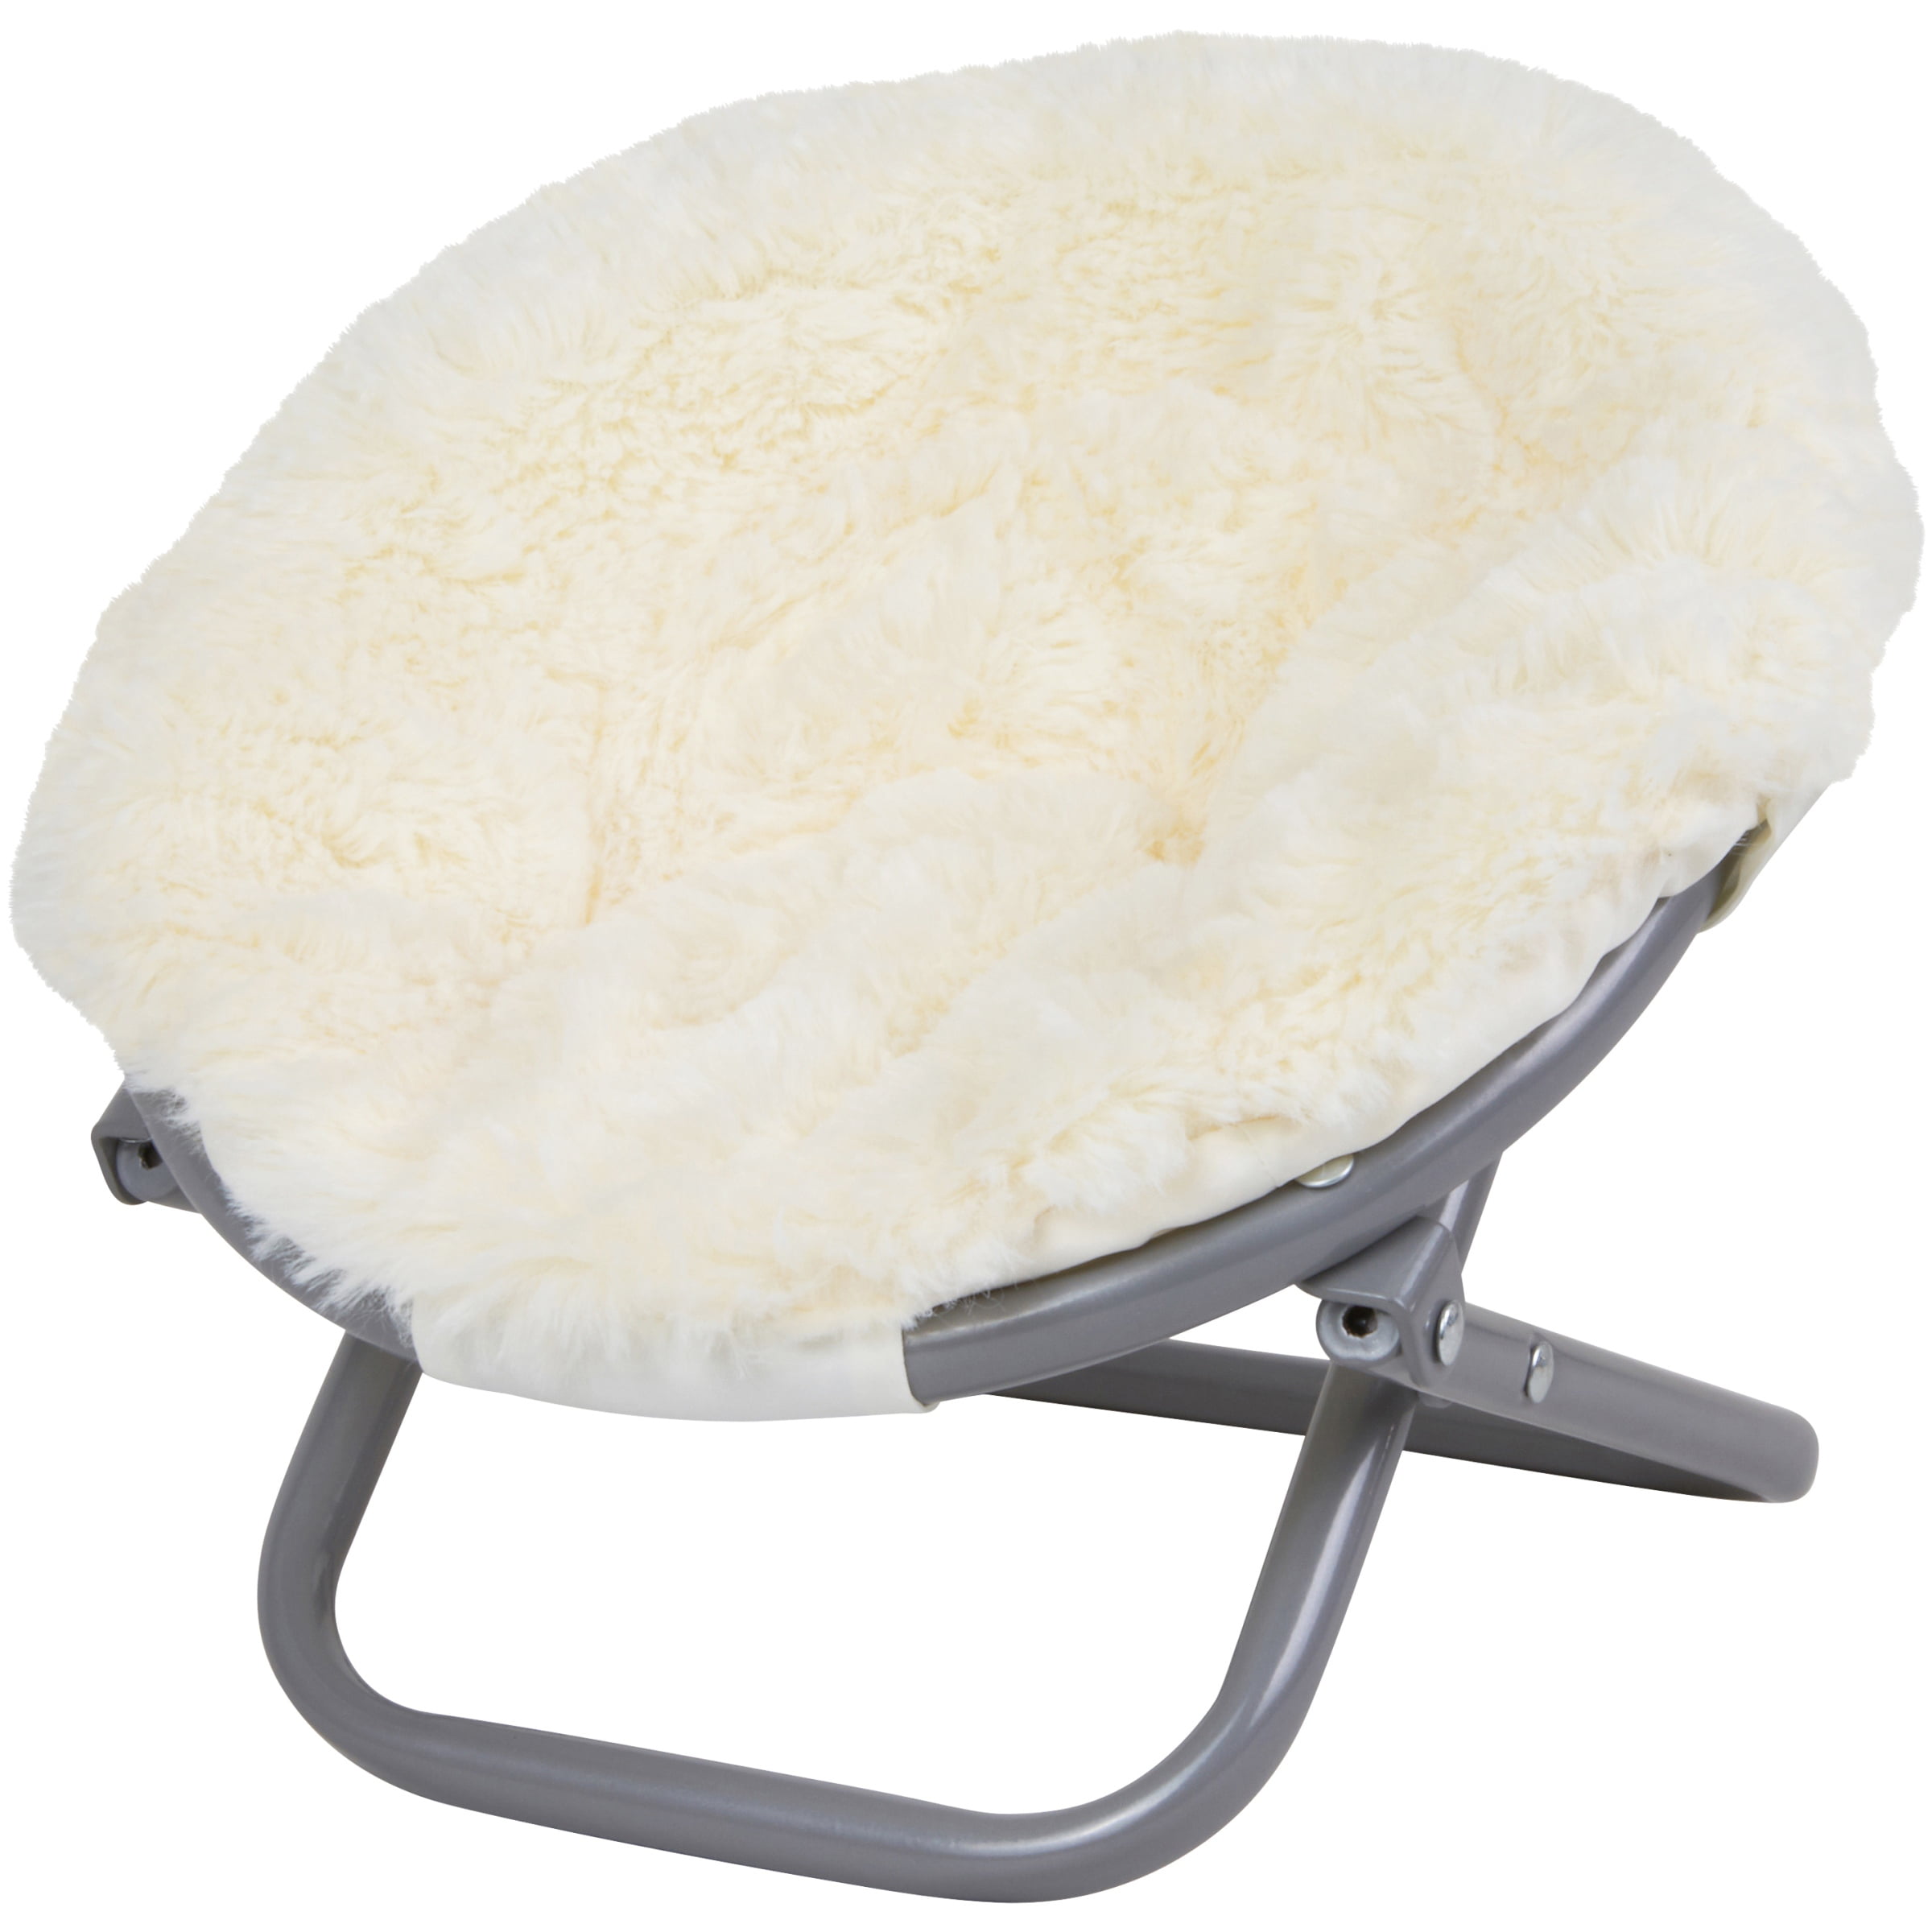 My Life As Fluffy Saucer Chair White For 18 Dolls Walmart Com